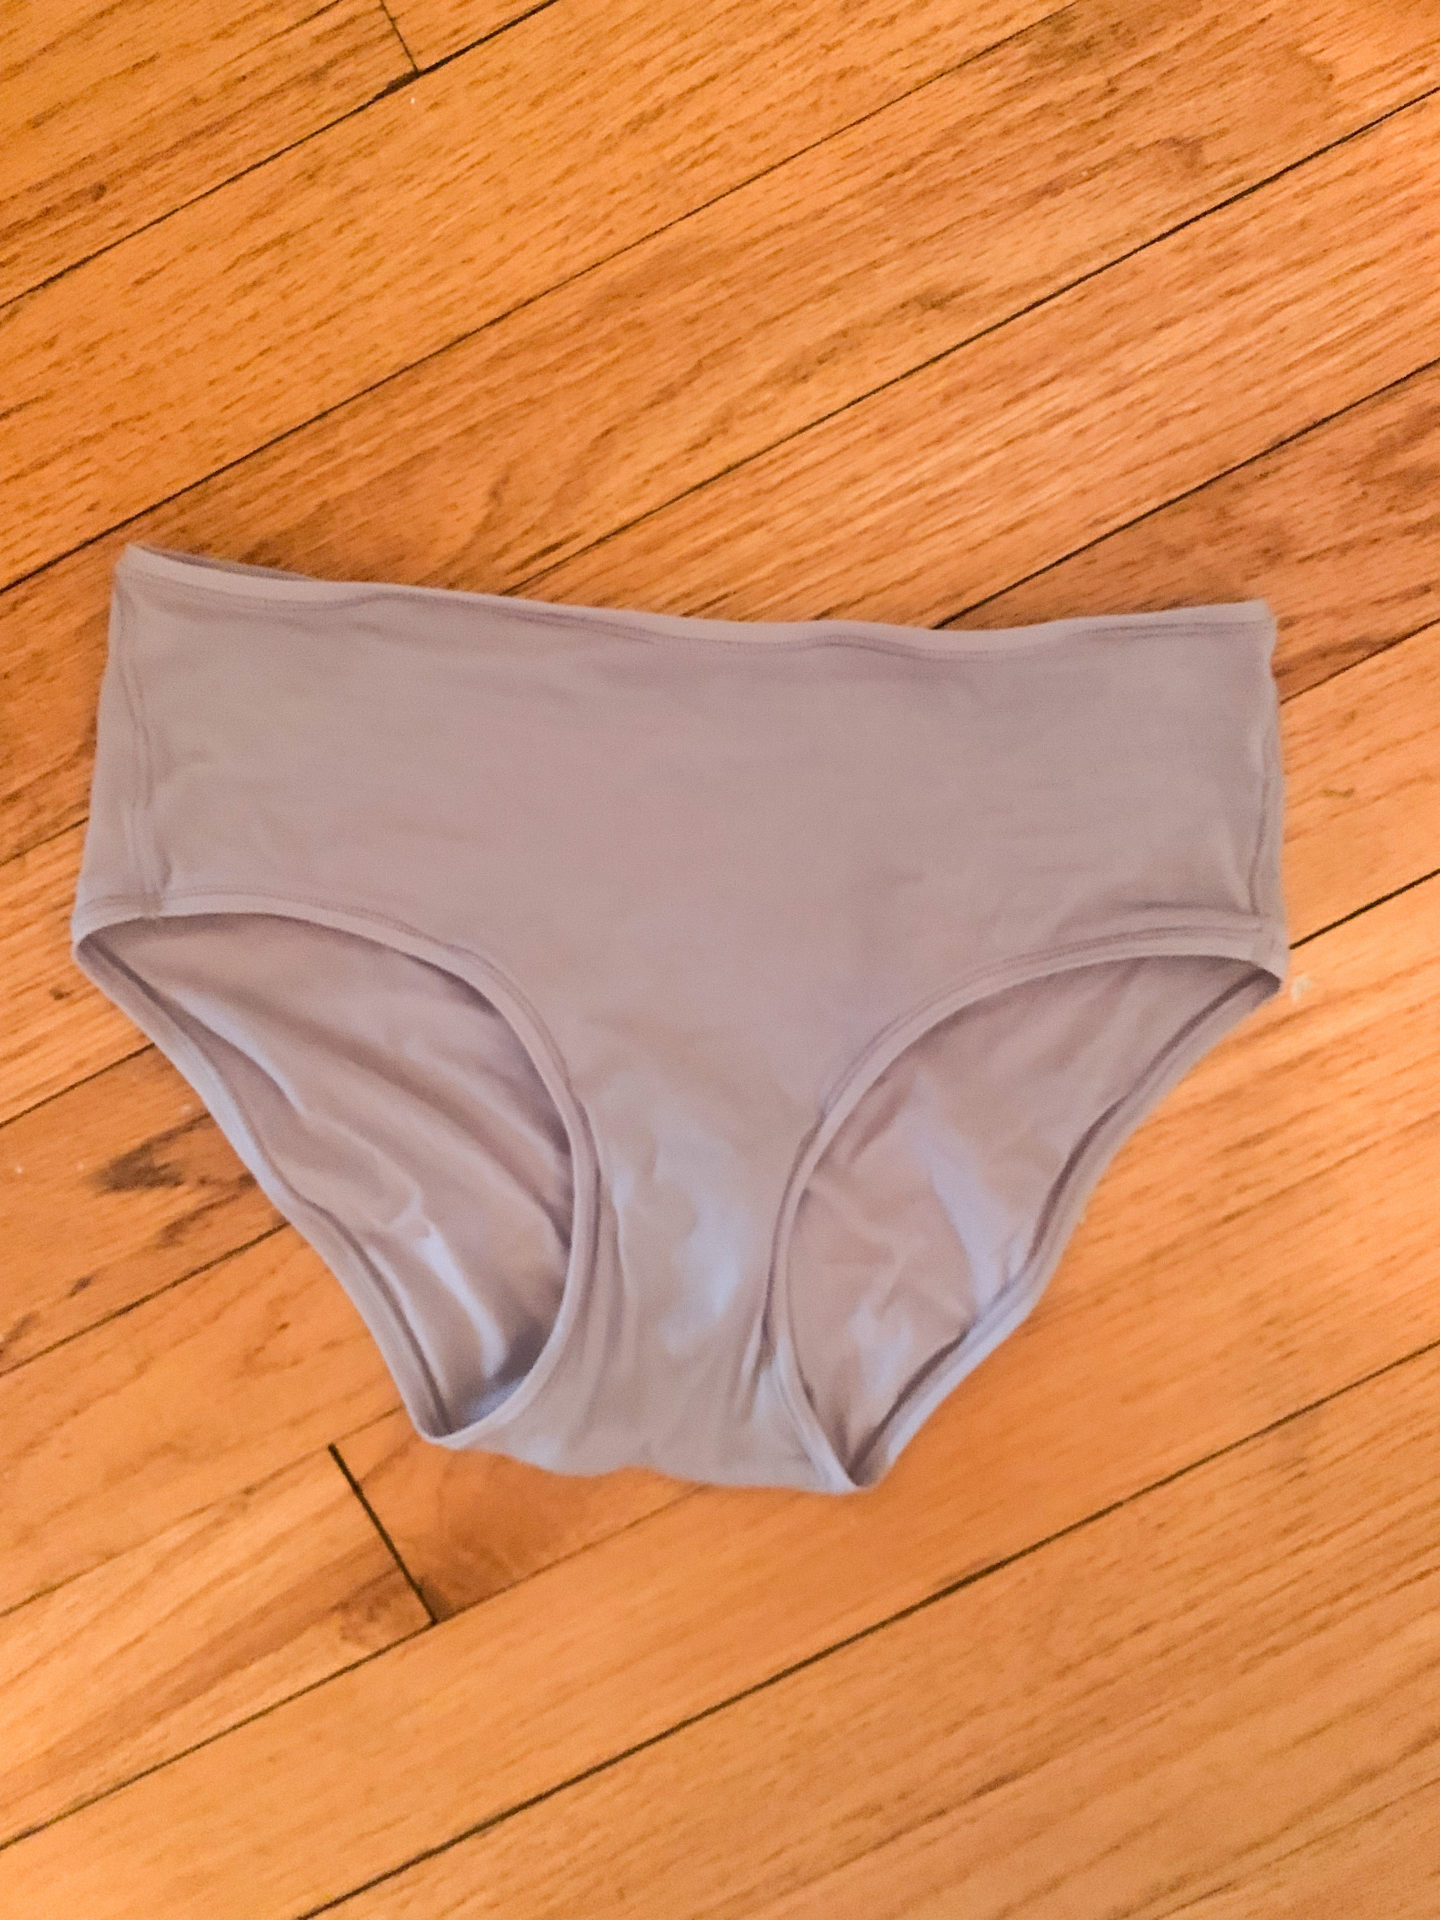 About your underwear drawer. The blog that went viral and started